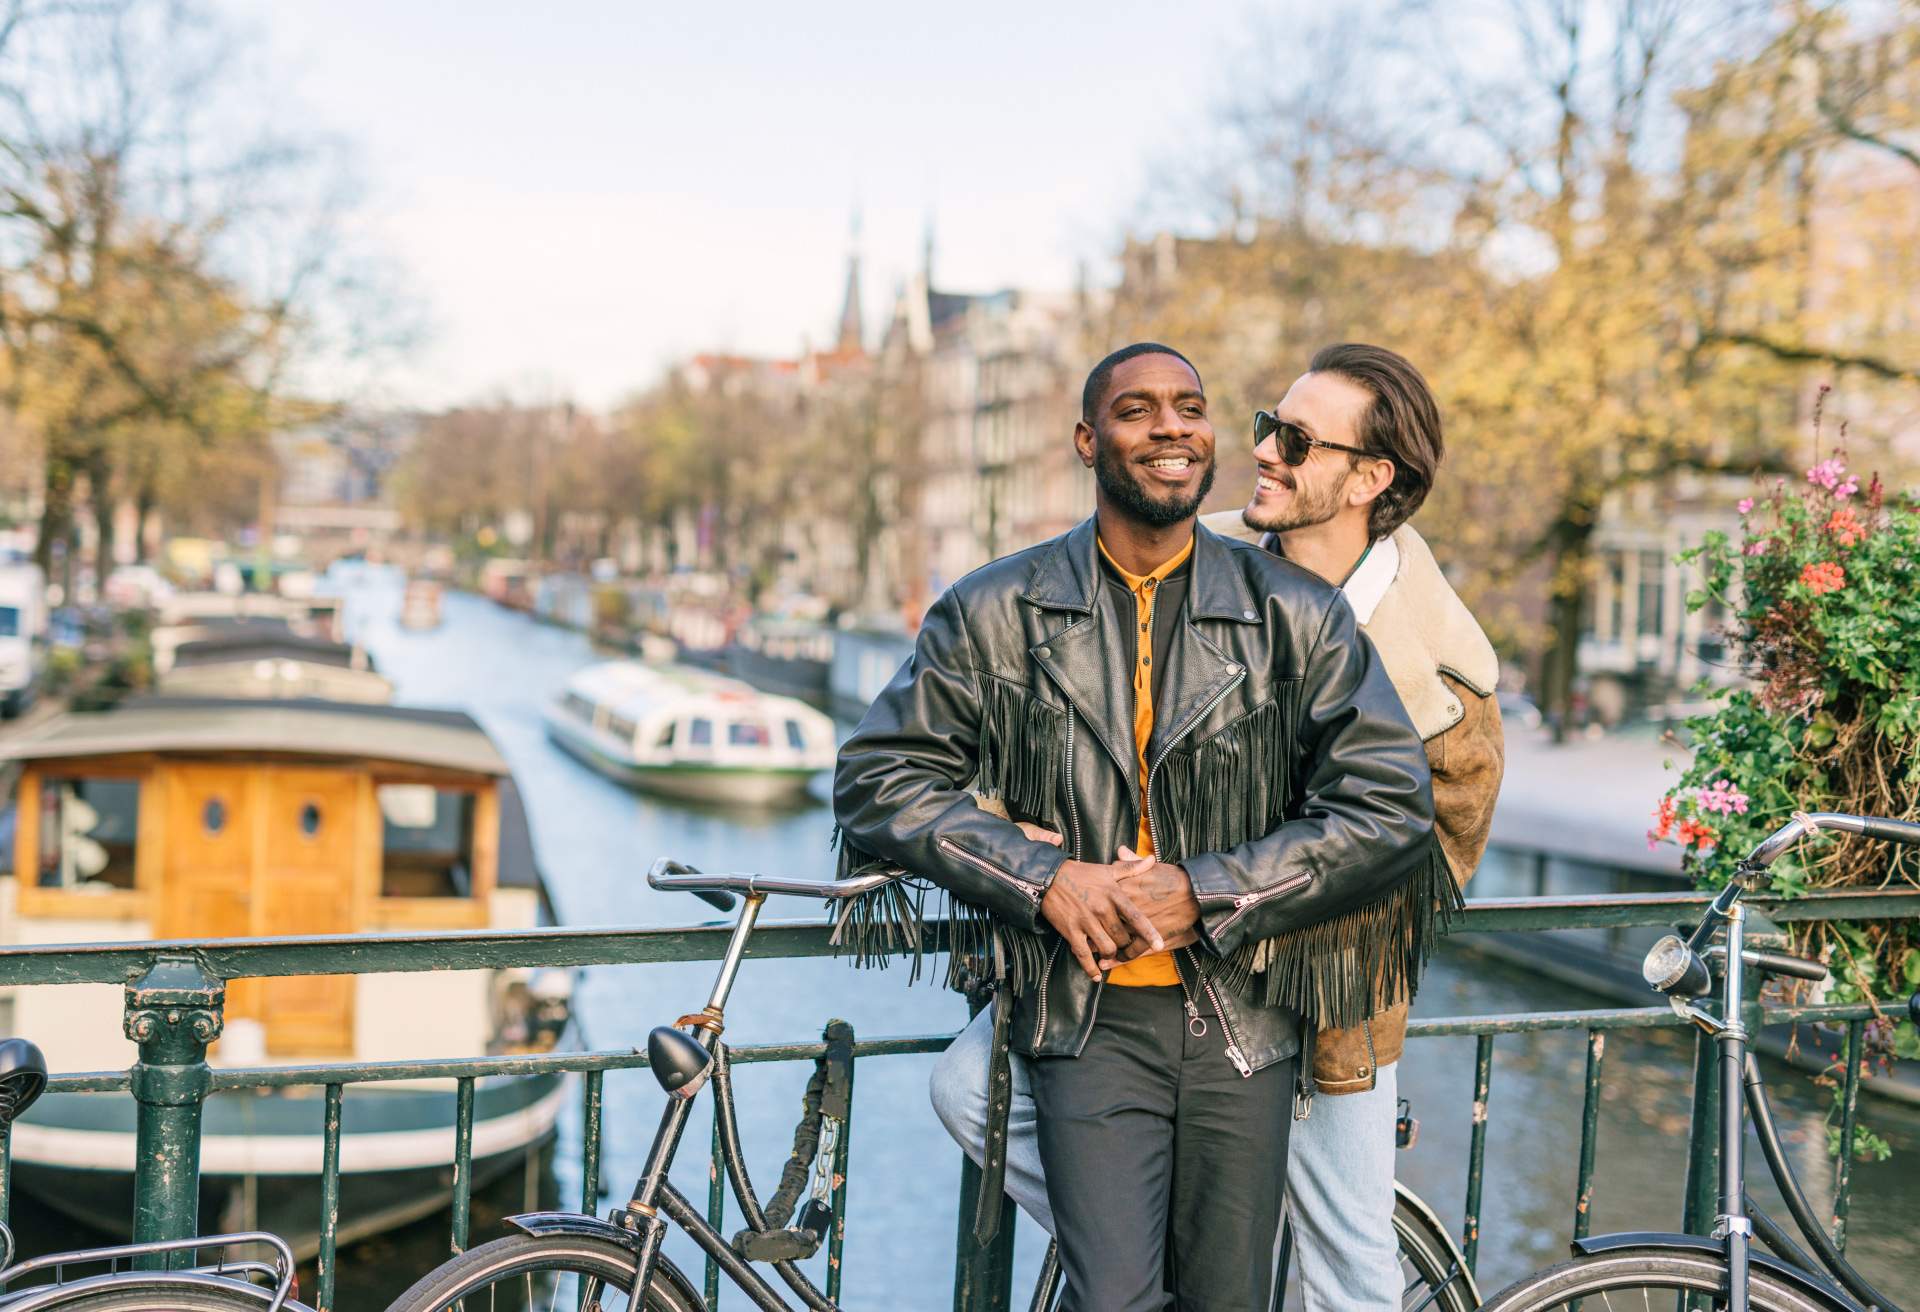 All LGBTQ travelers need to know when visiting Paris - KAYAK